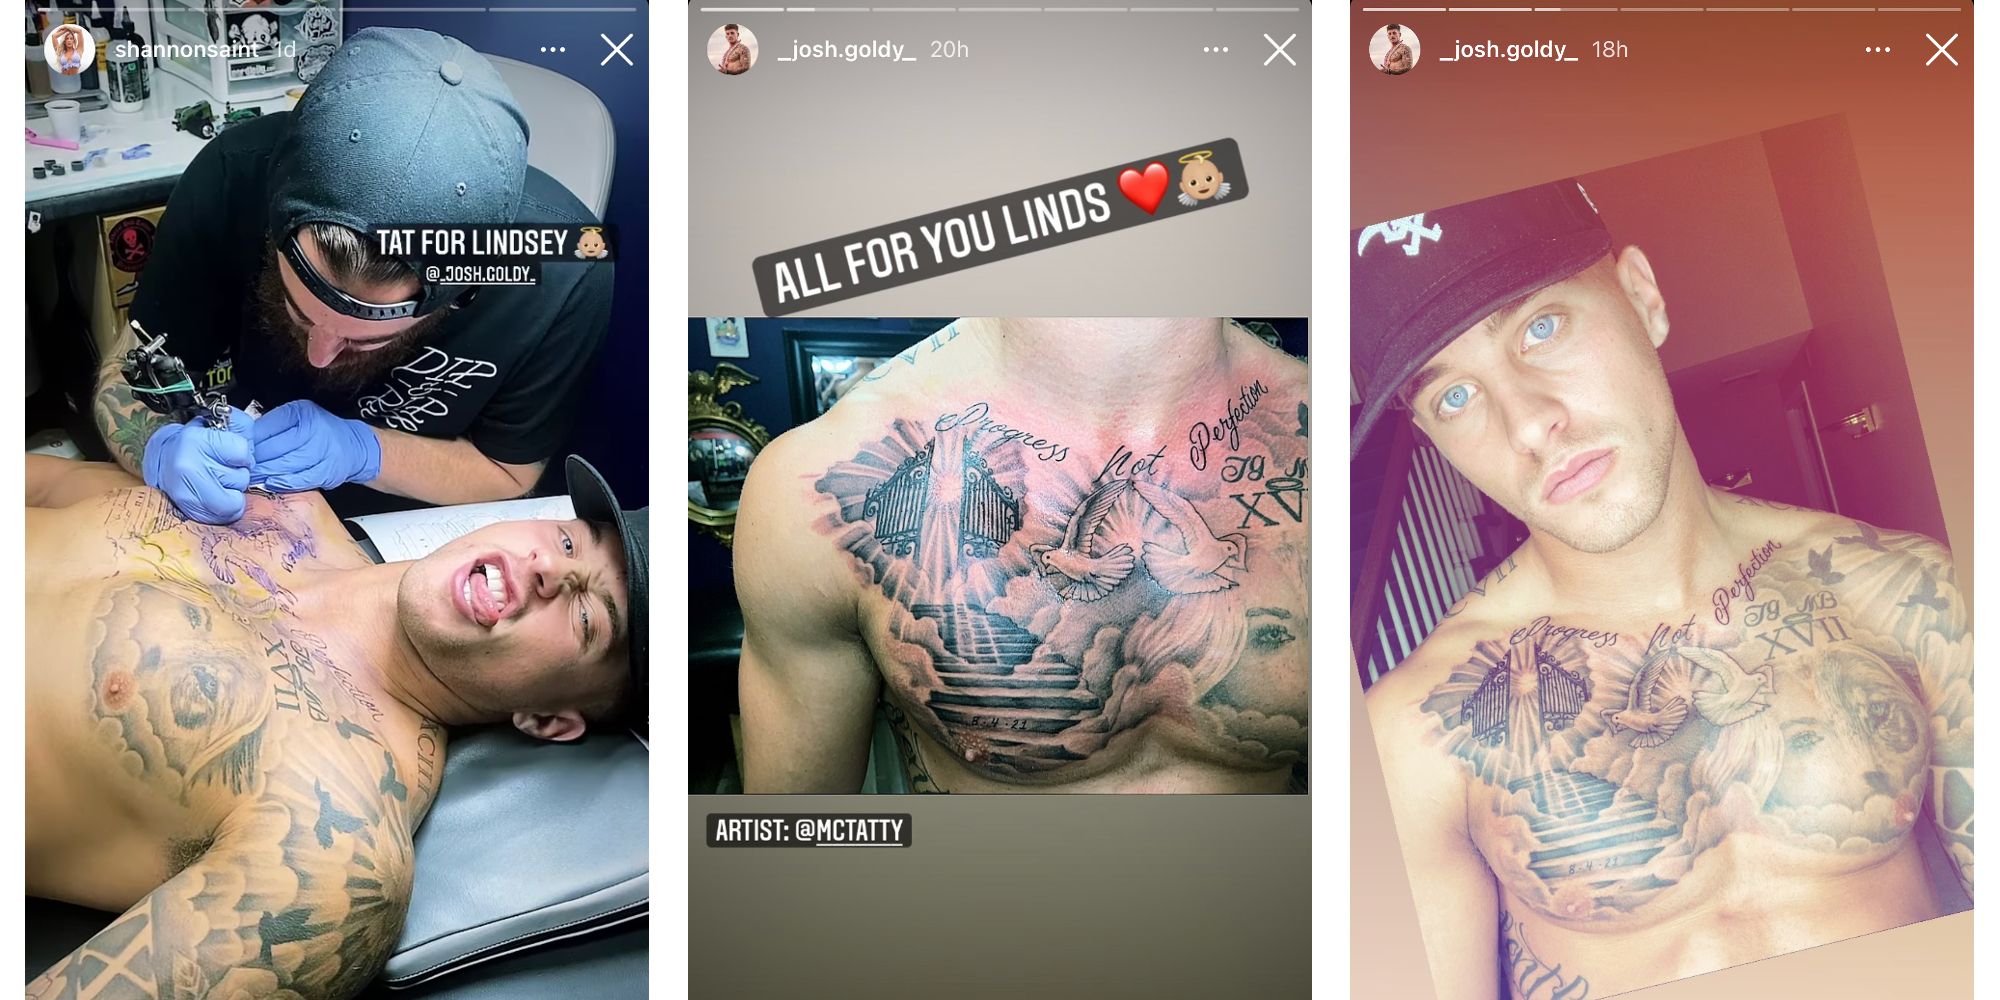 Josh Goldstein from Love Island USA season 3 via Instagram Story getting a tattoo to honor his sister Lindsey Beth Goldstein